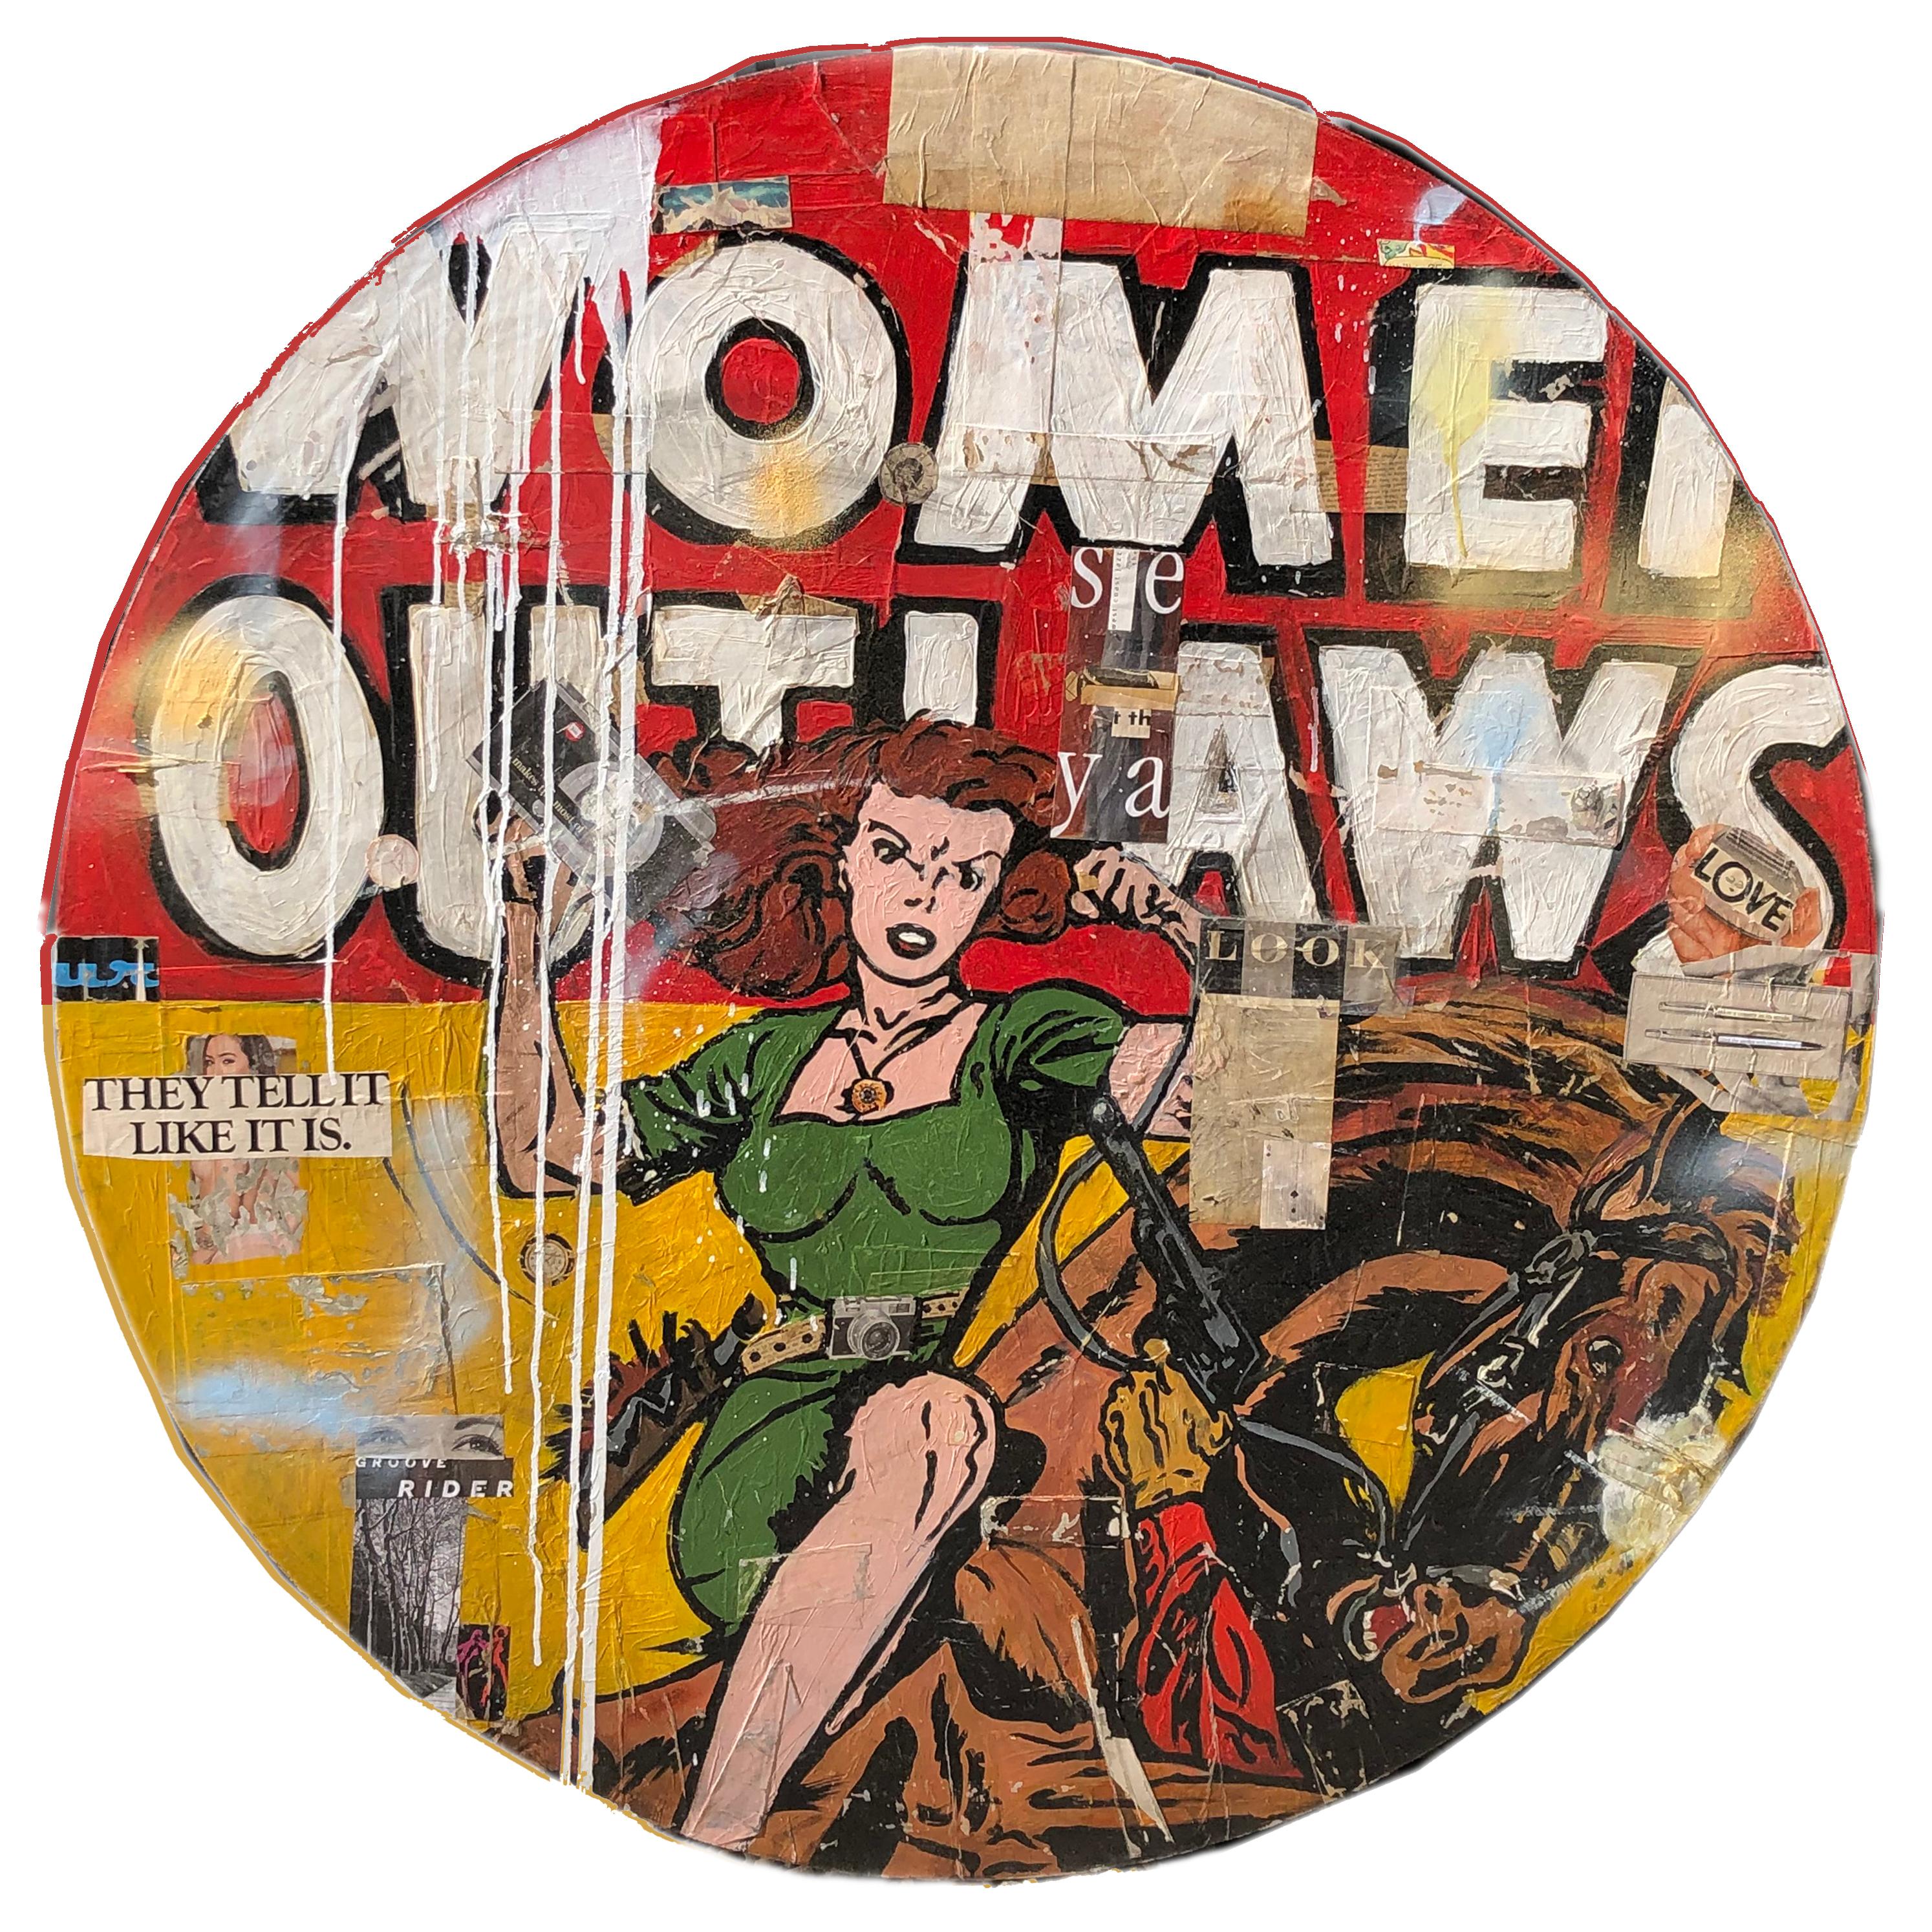 Women Outlaws- red and yellow collage and resin neo-pop painting on panel - Mixed Media Art by Greg Miller